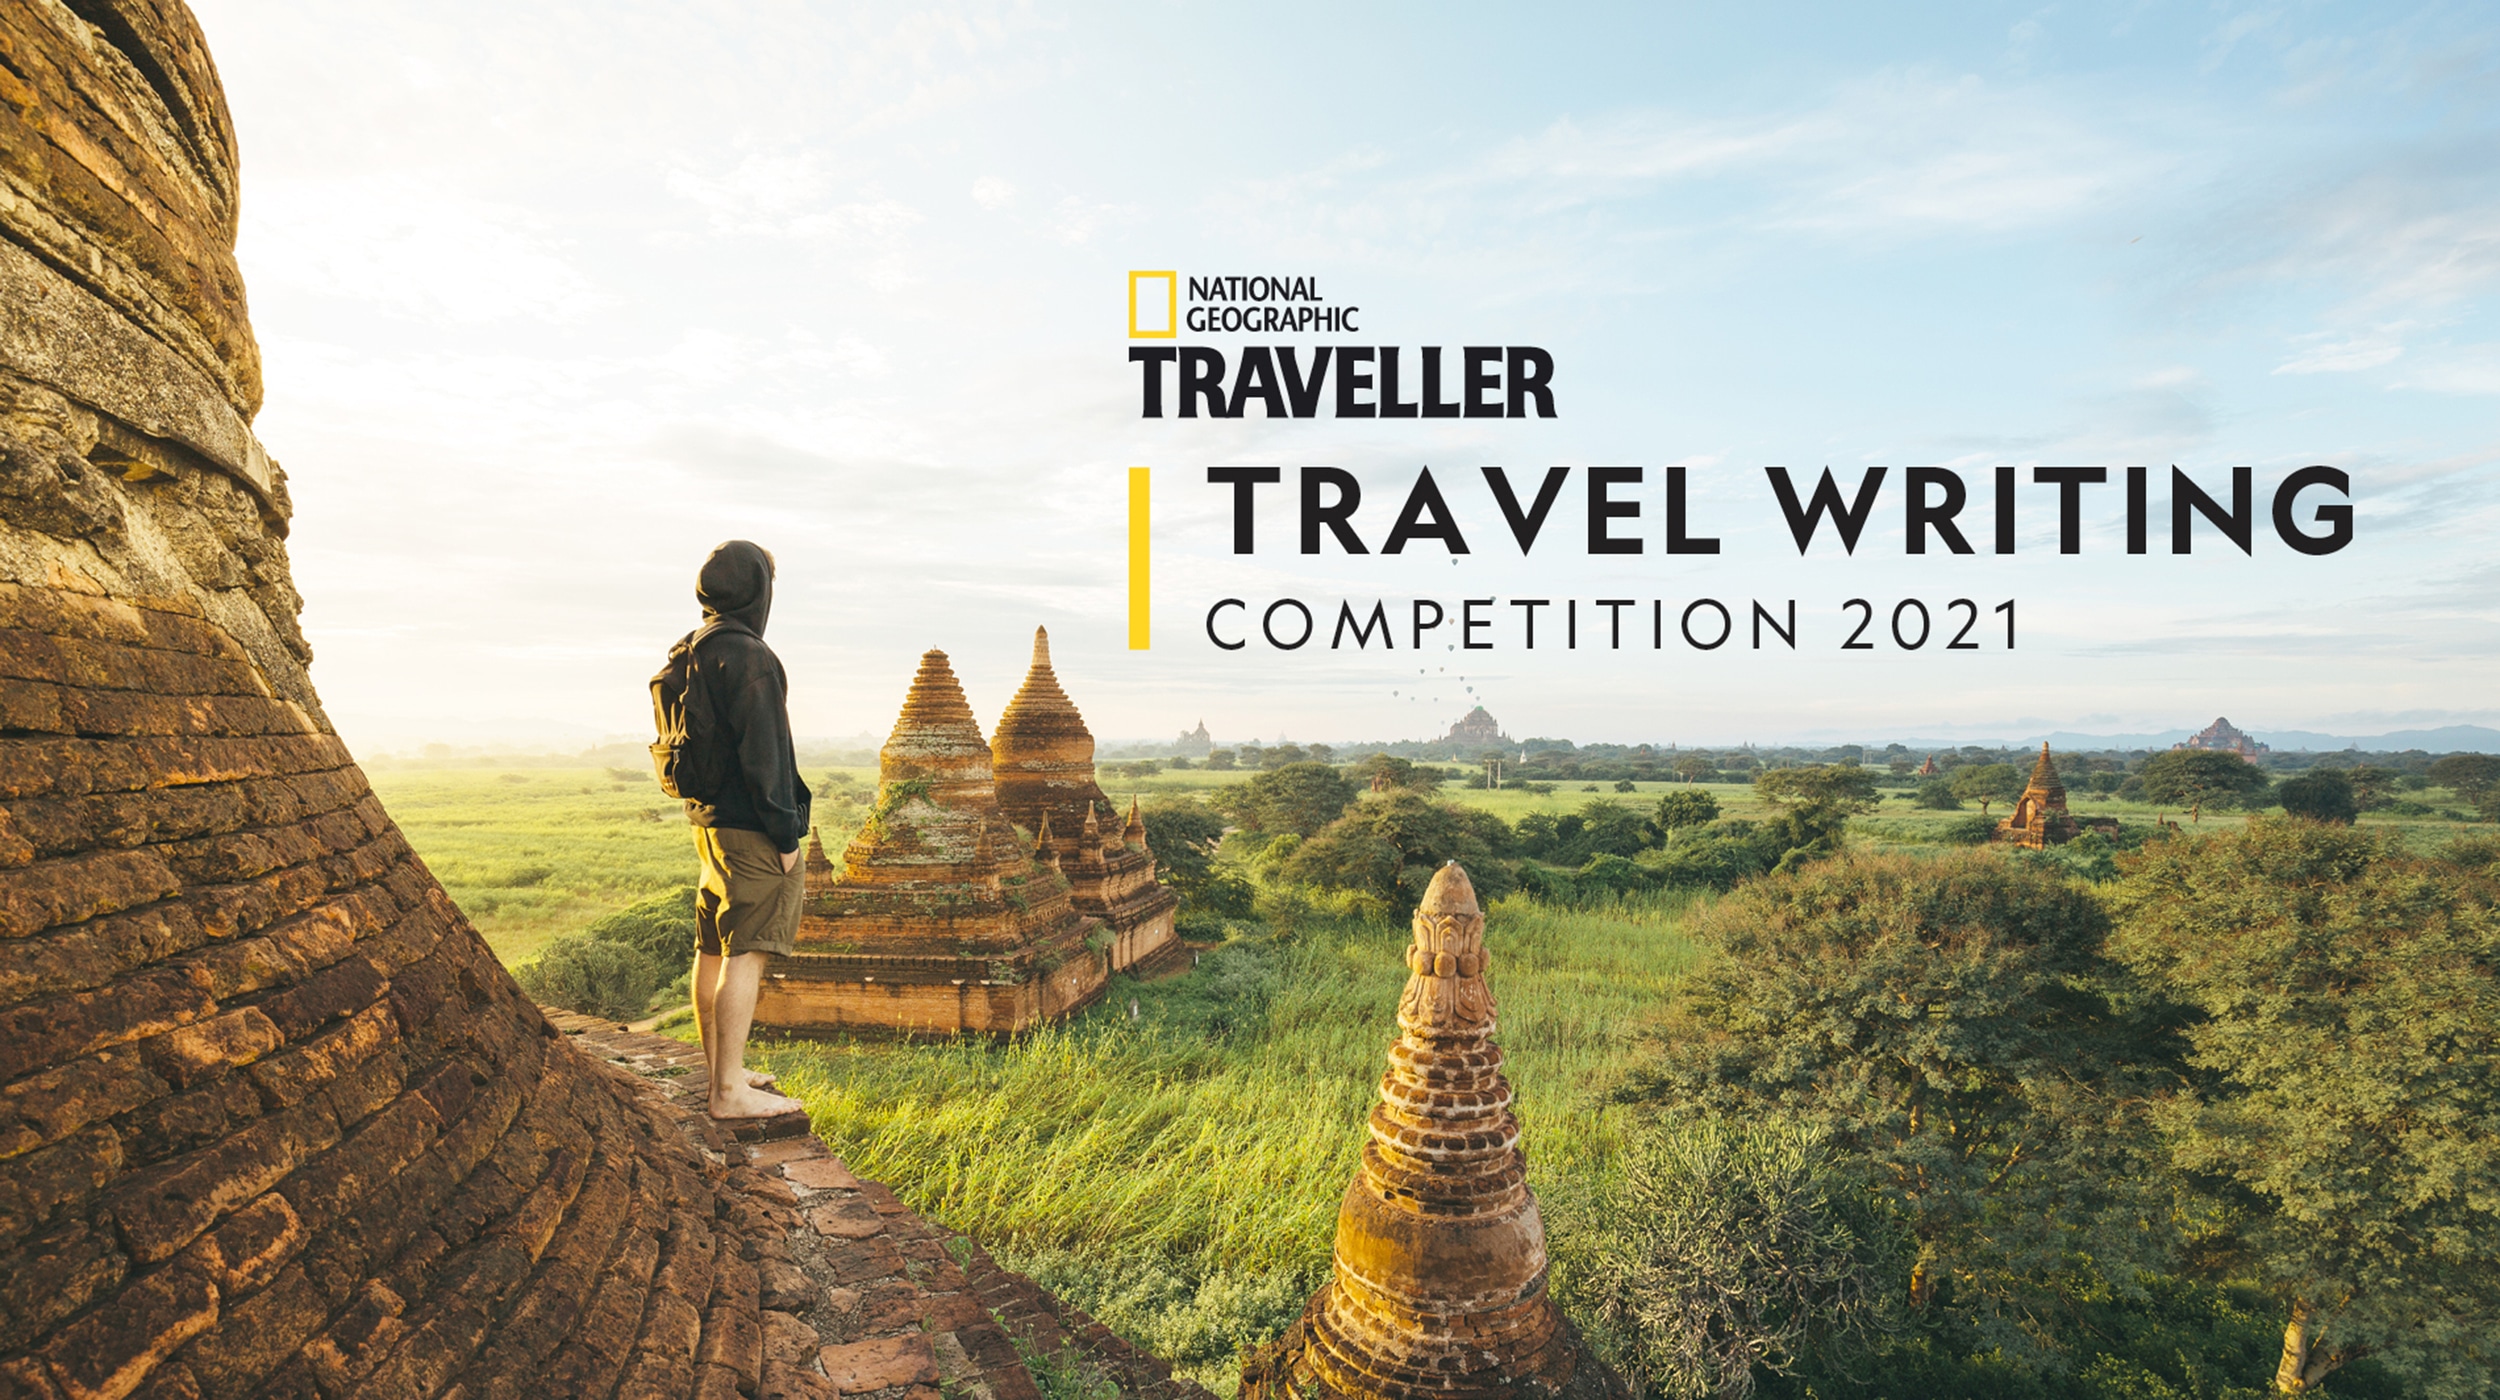 national geographic travel writing competition 2022